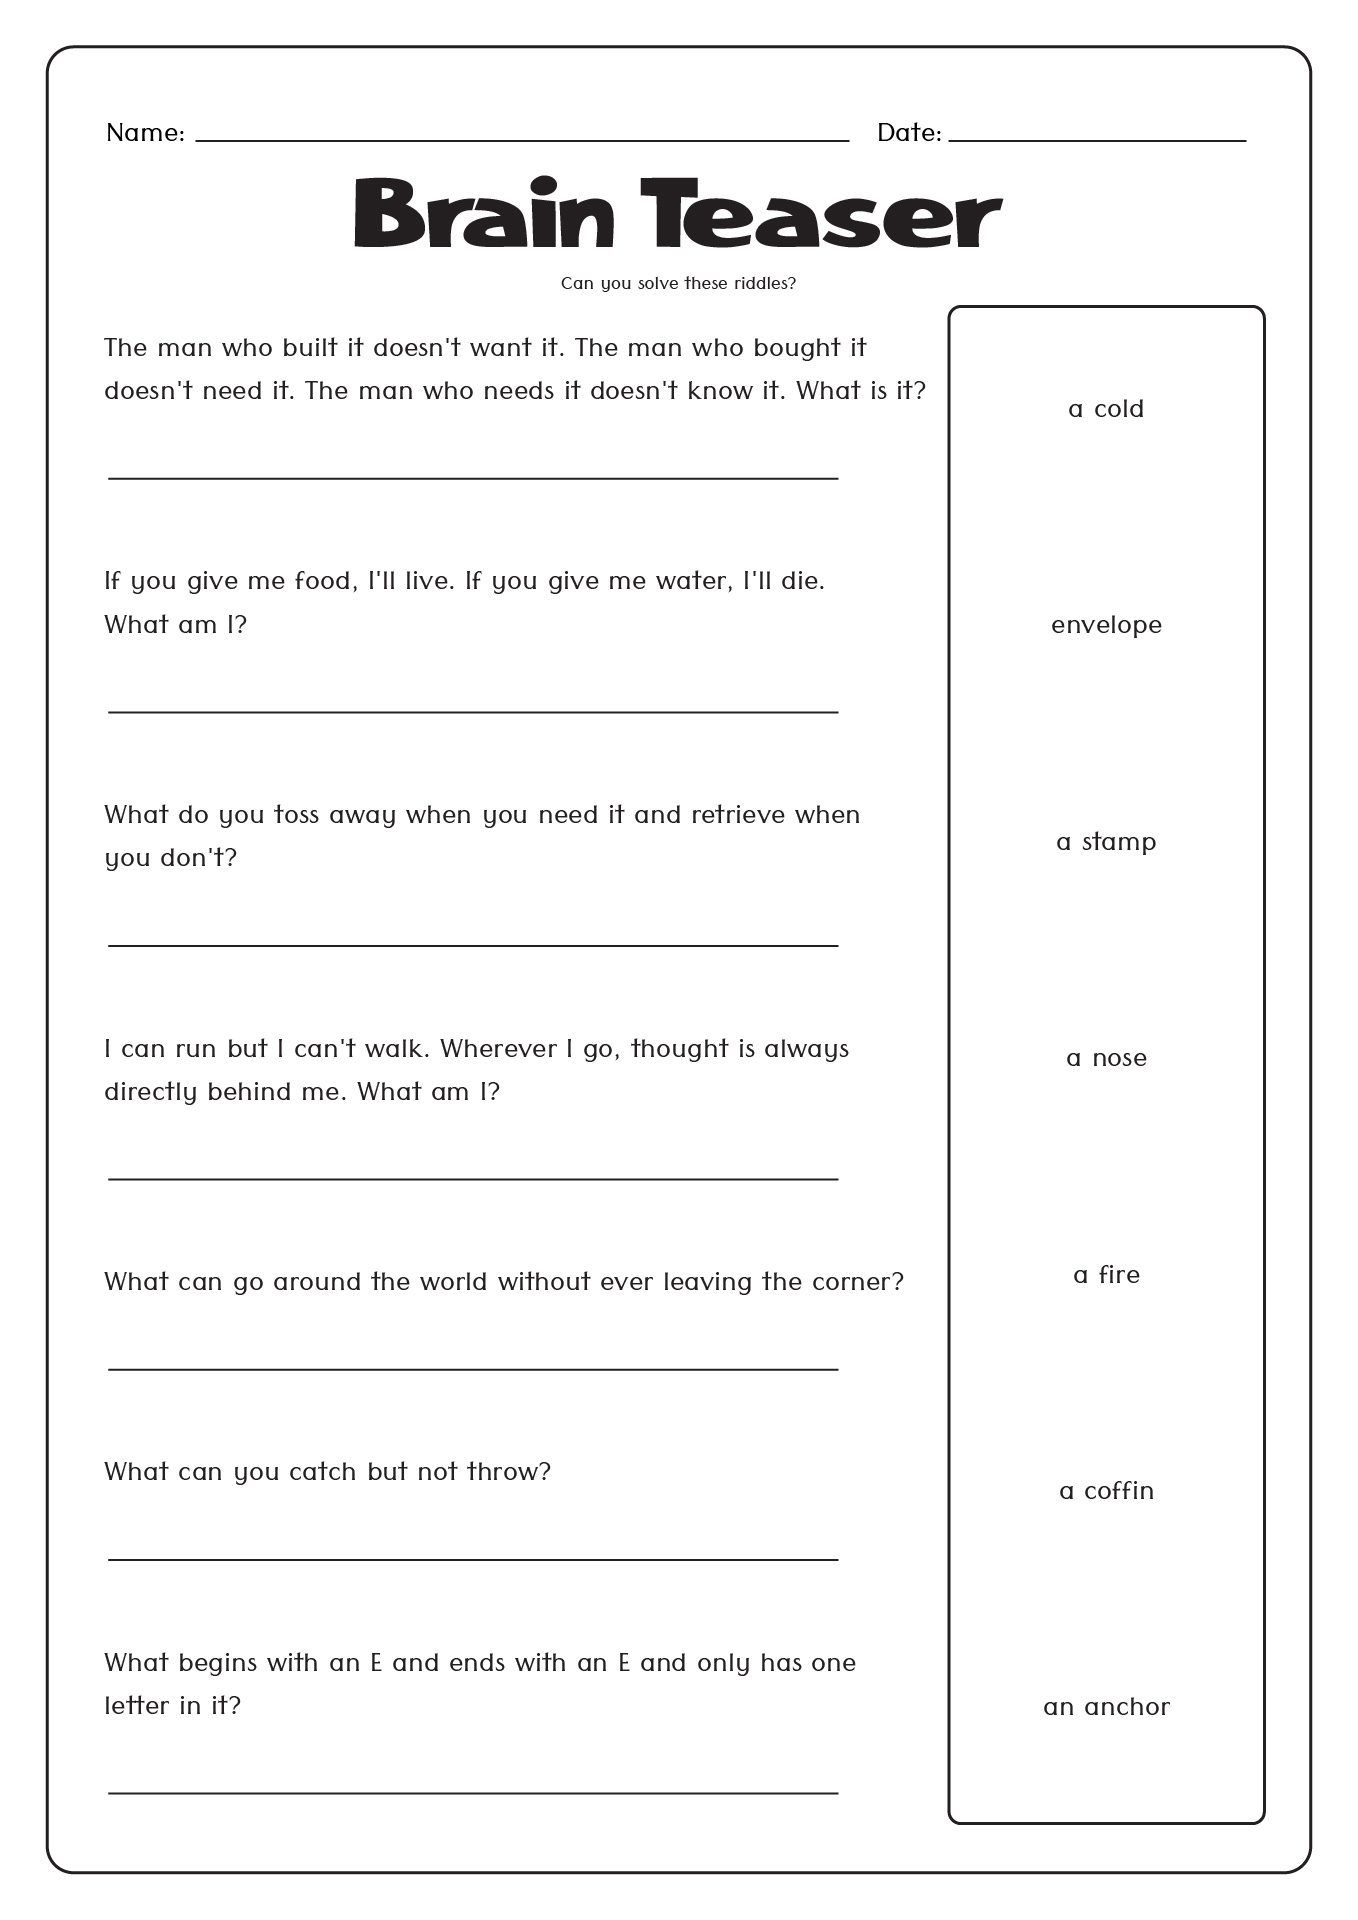 Free Printable Brain Teasers with Answers